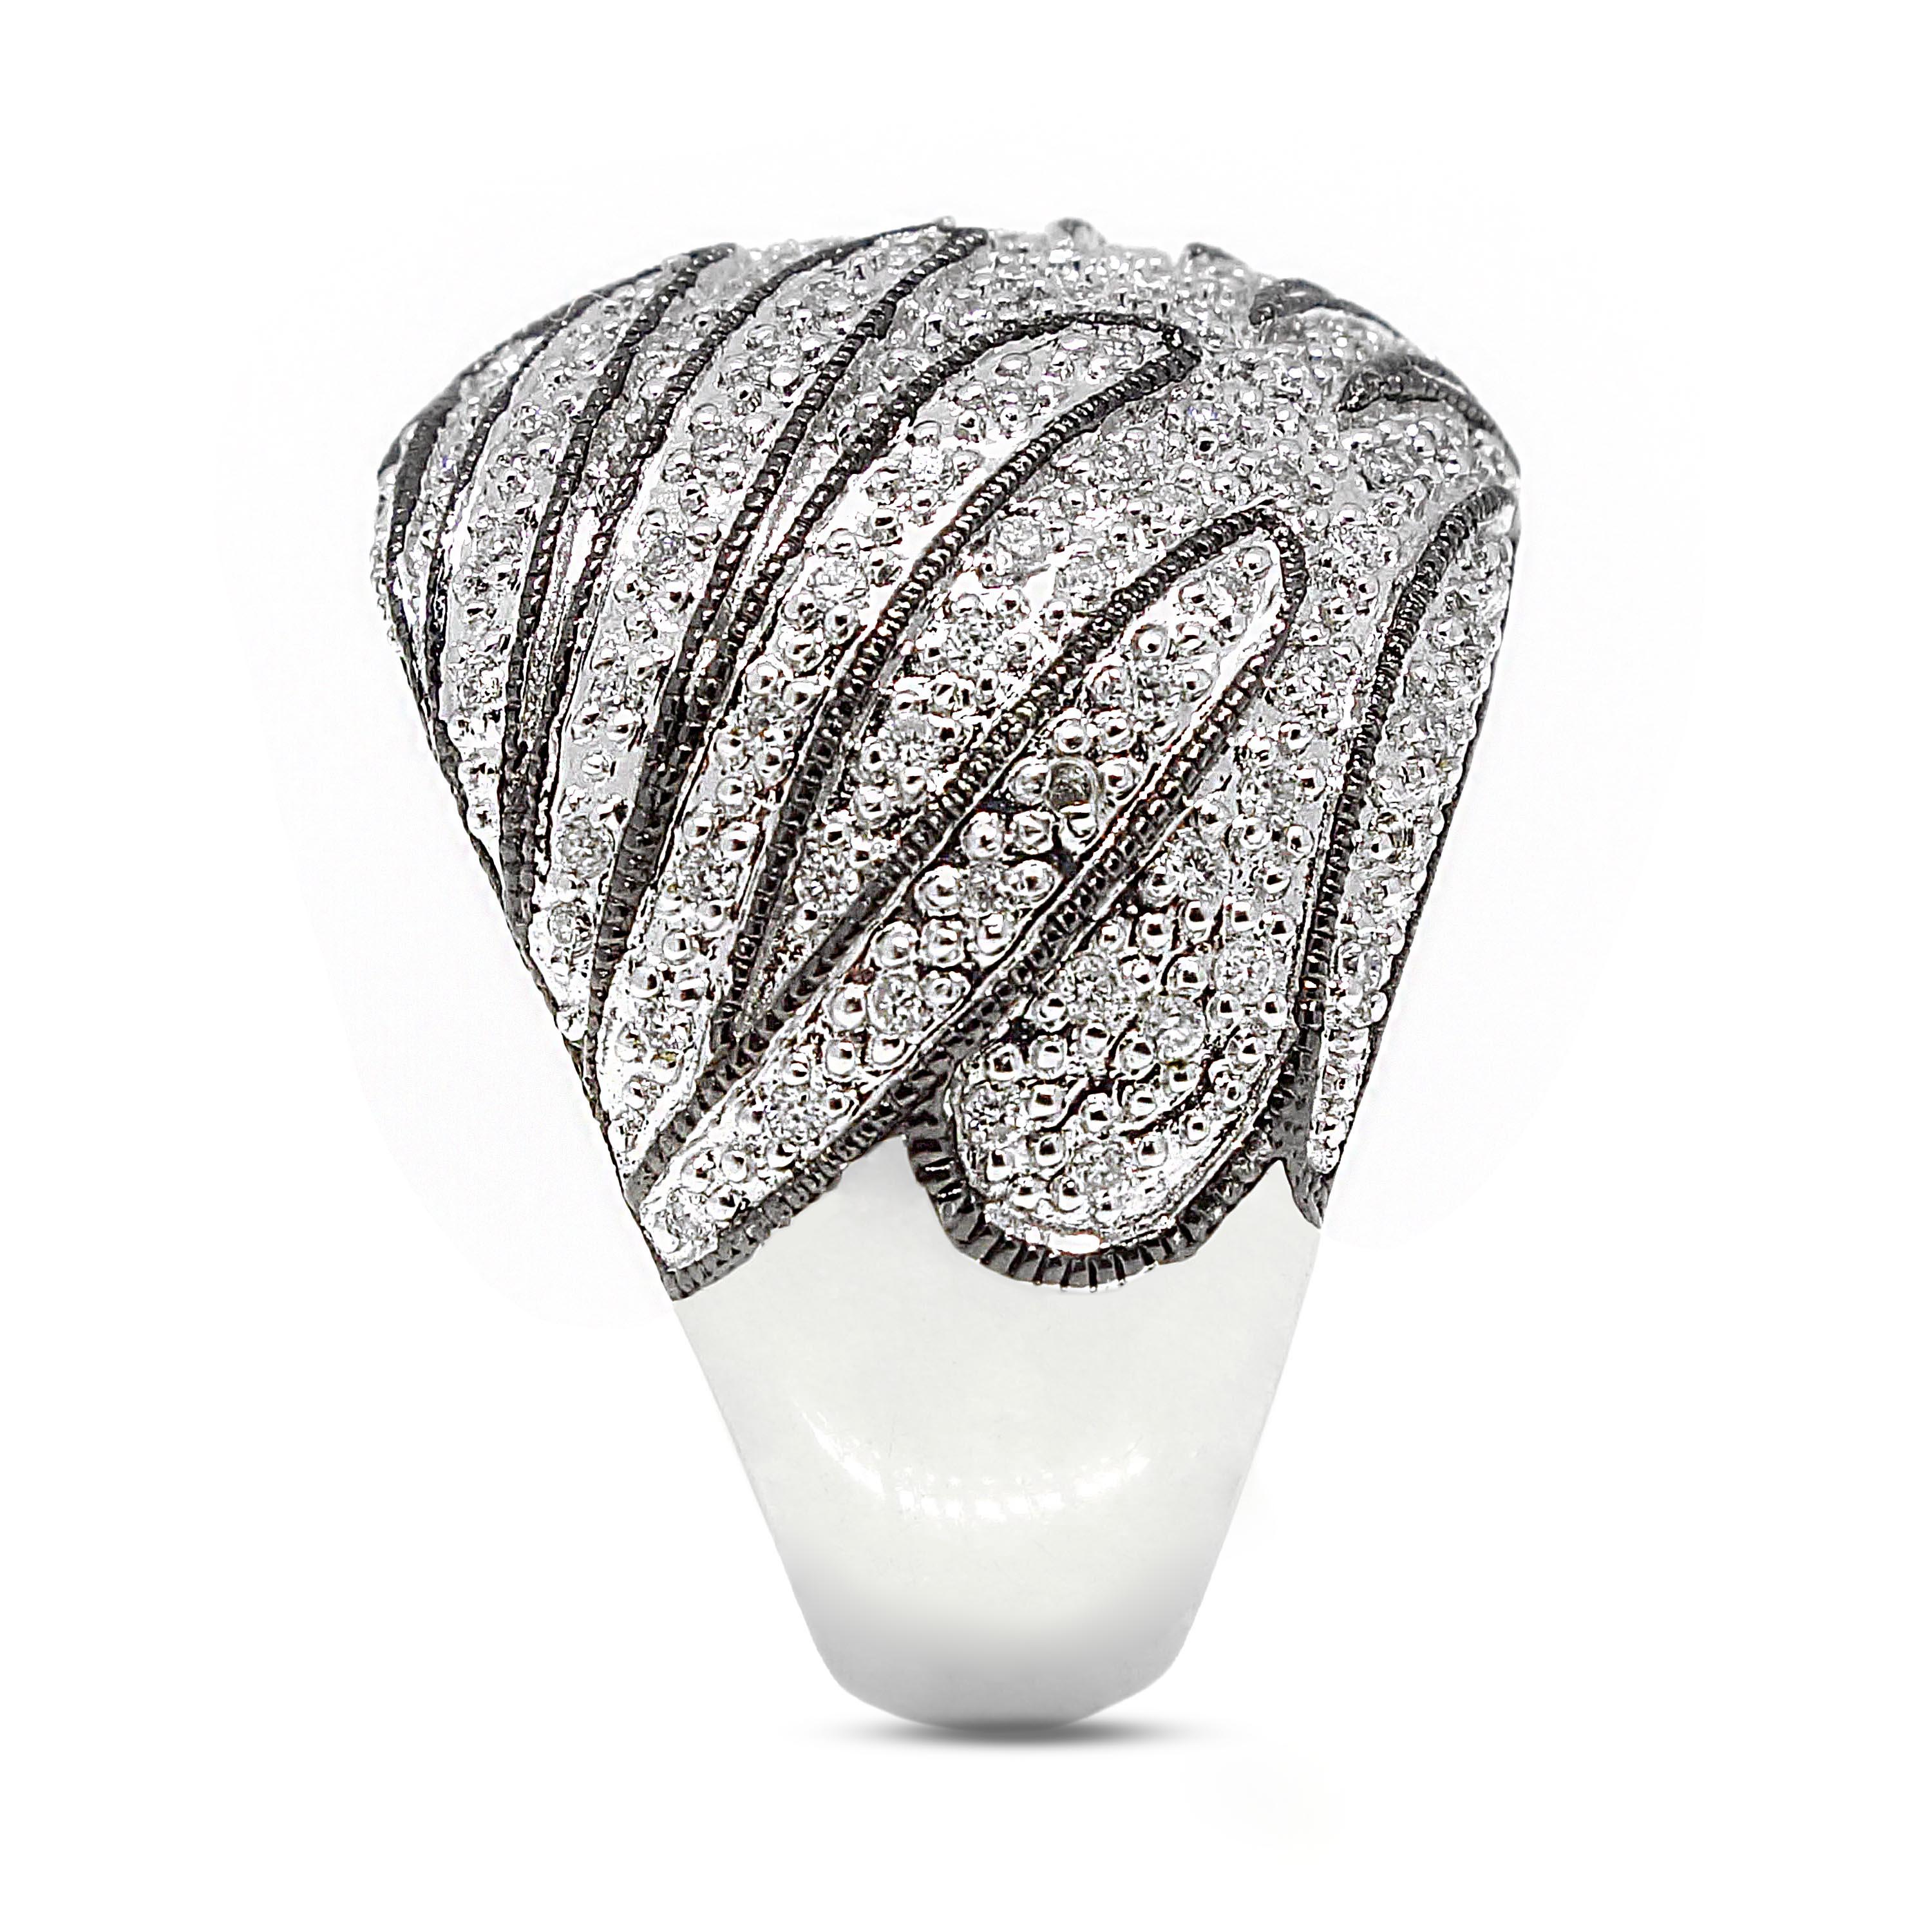 Diamond band containing 214 round brilliant cut diamonds of about 0.90 carats with a clarity of SI and color H. All diamonds are set in 14k white gold. The total weight of the band is approximately 15.35 grams.

Measurements: (W) 19.65 mm
Band Size: